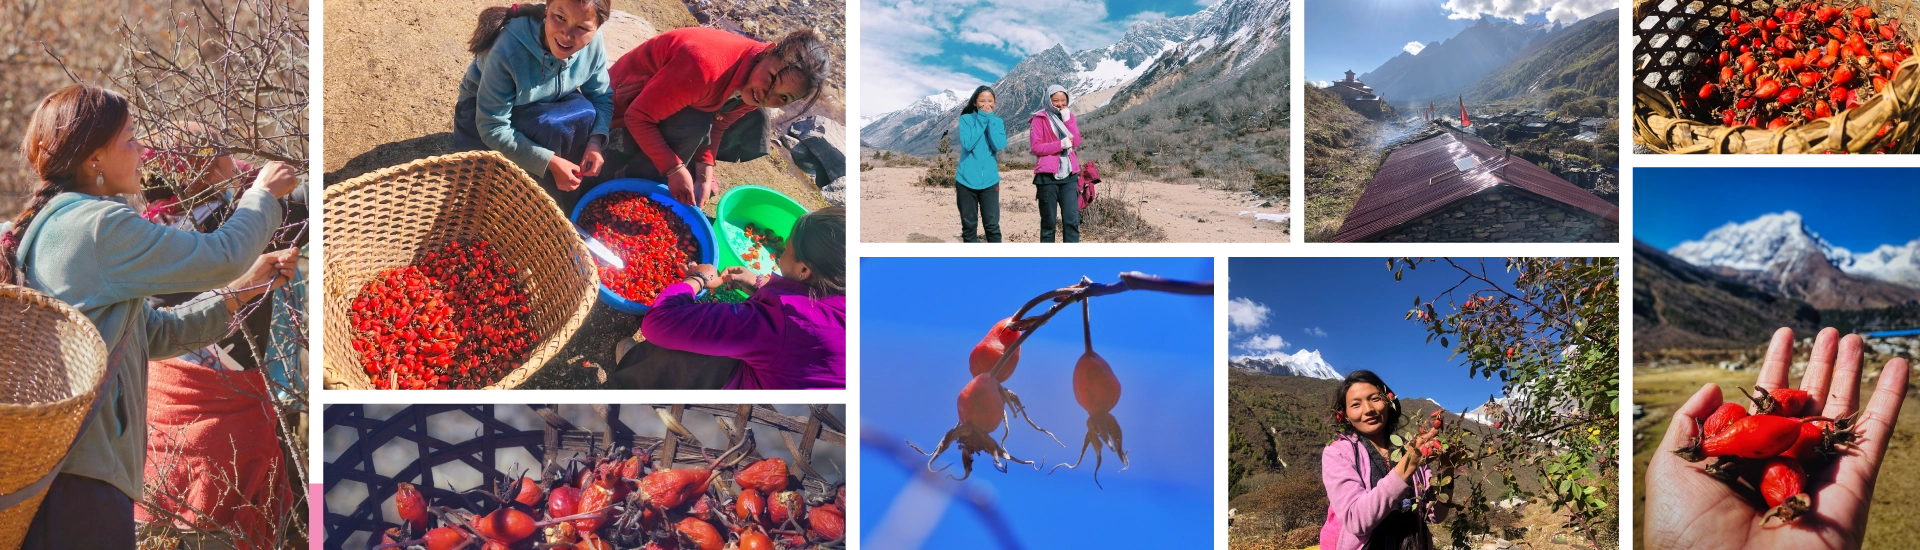 Photos of the Himalayan gob-chi berries and the Samagaun women who harvest them.